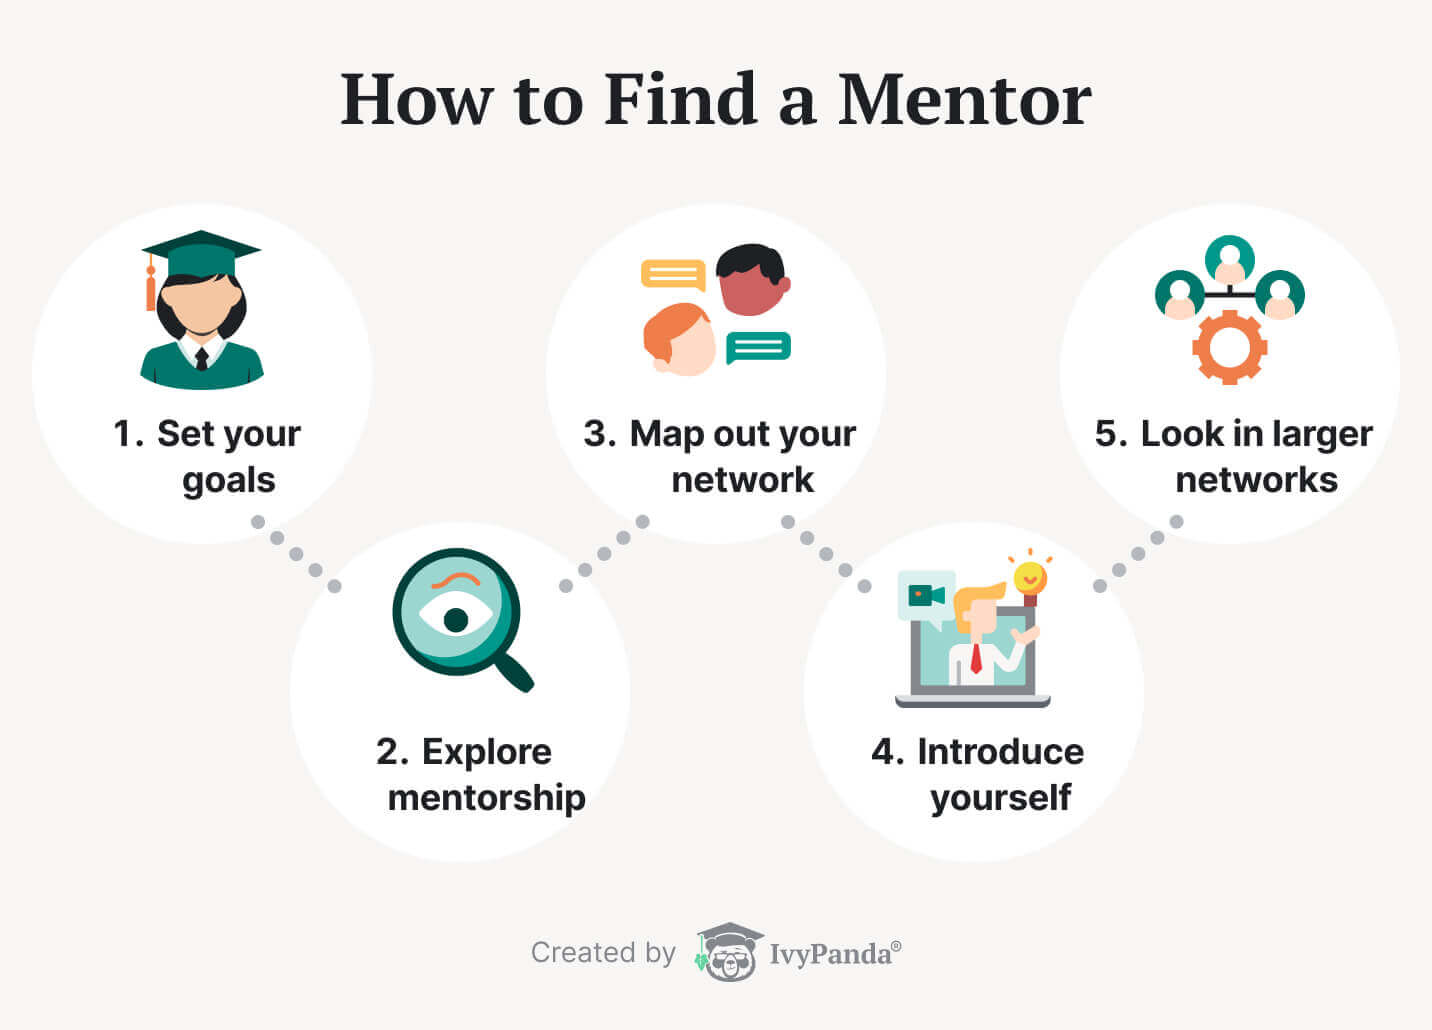 The picture describes the process of getting a mentor in 5 simple steps.